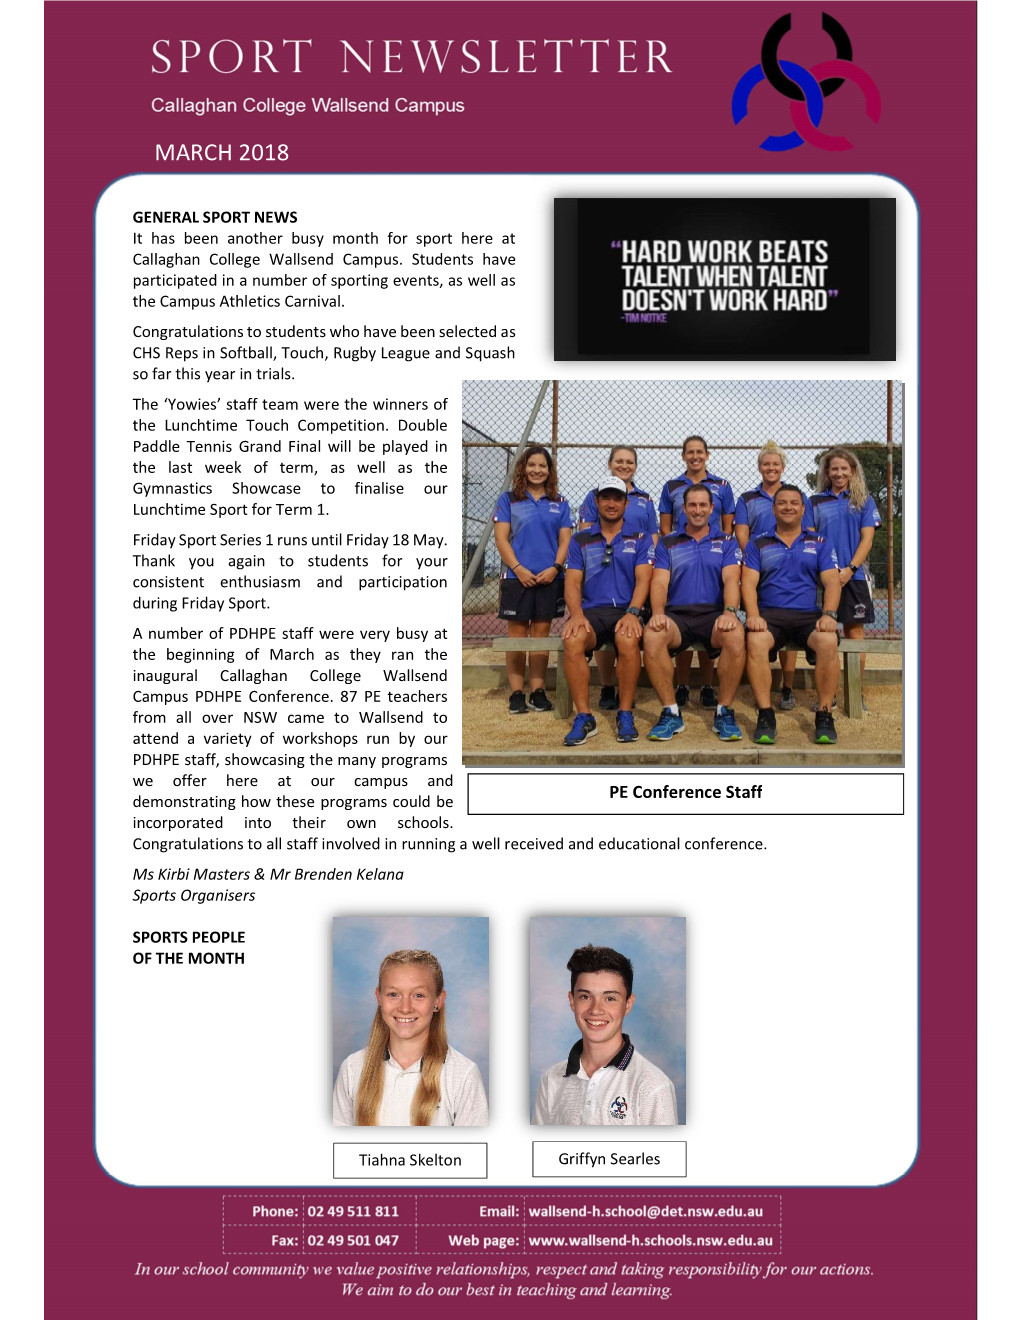 CCWC March 2018 Sports Newsletter